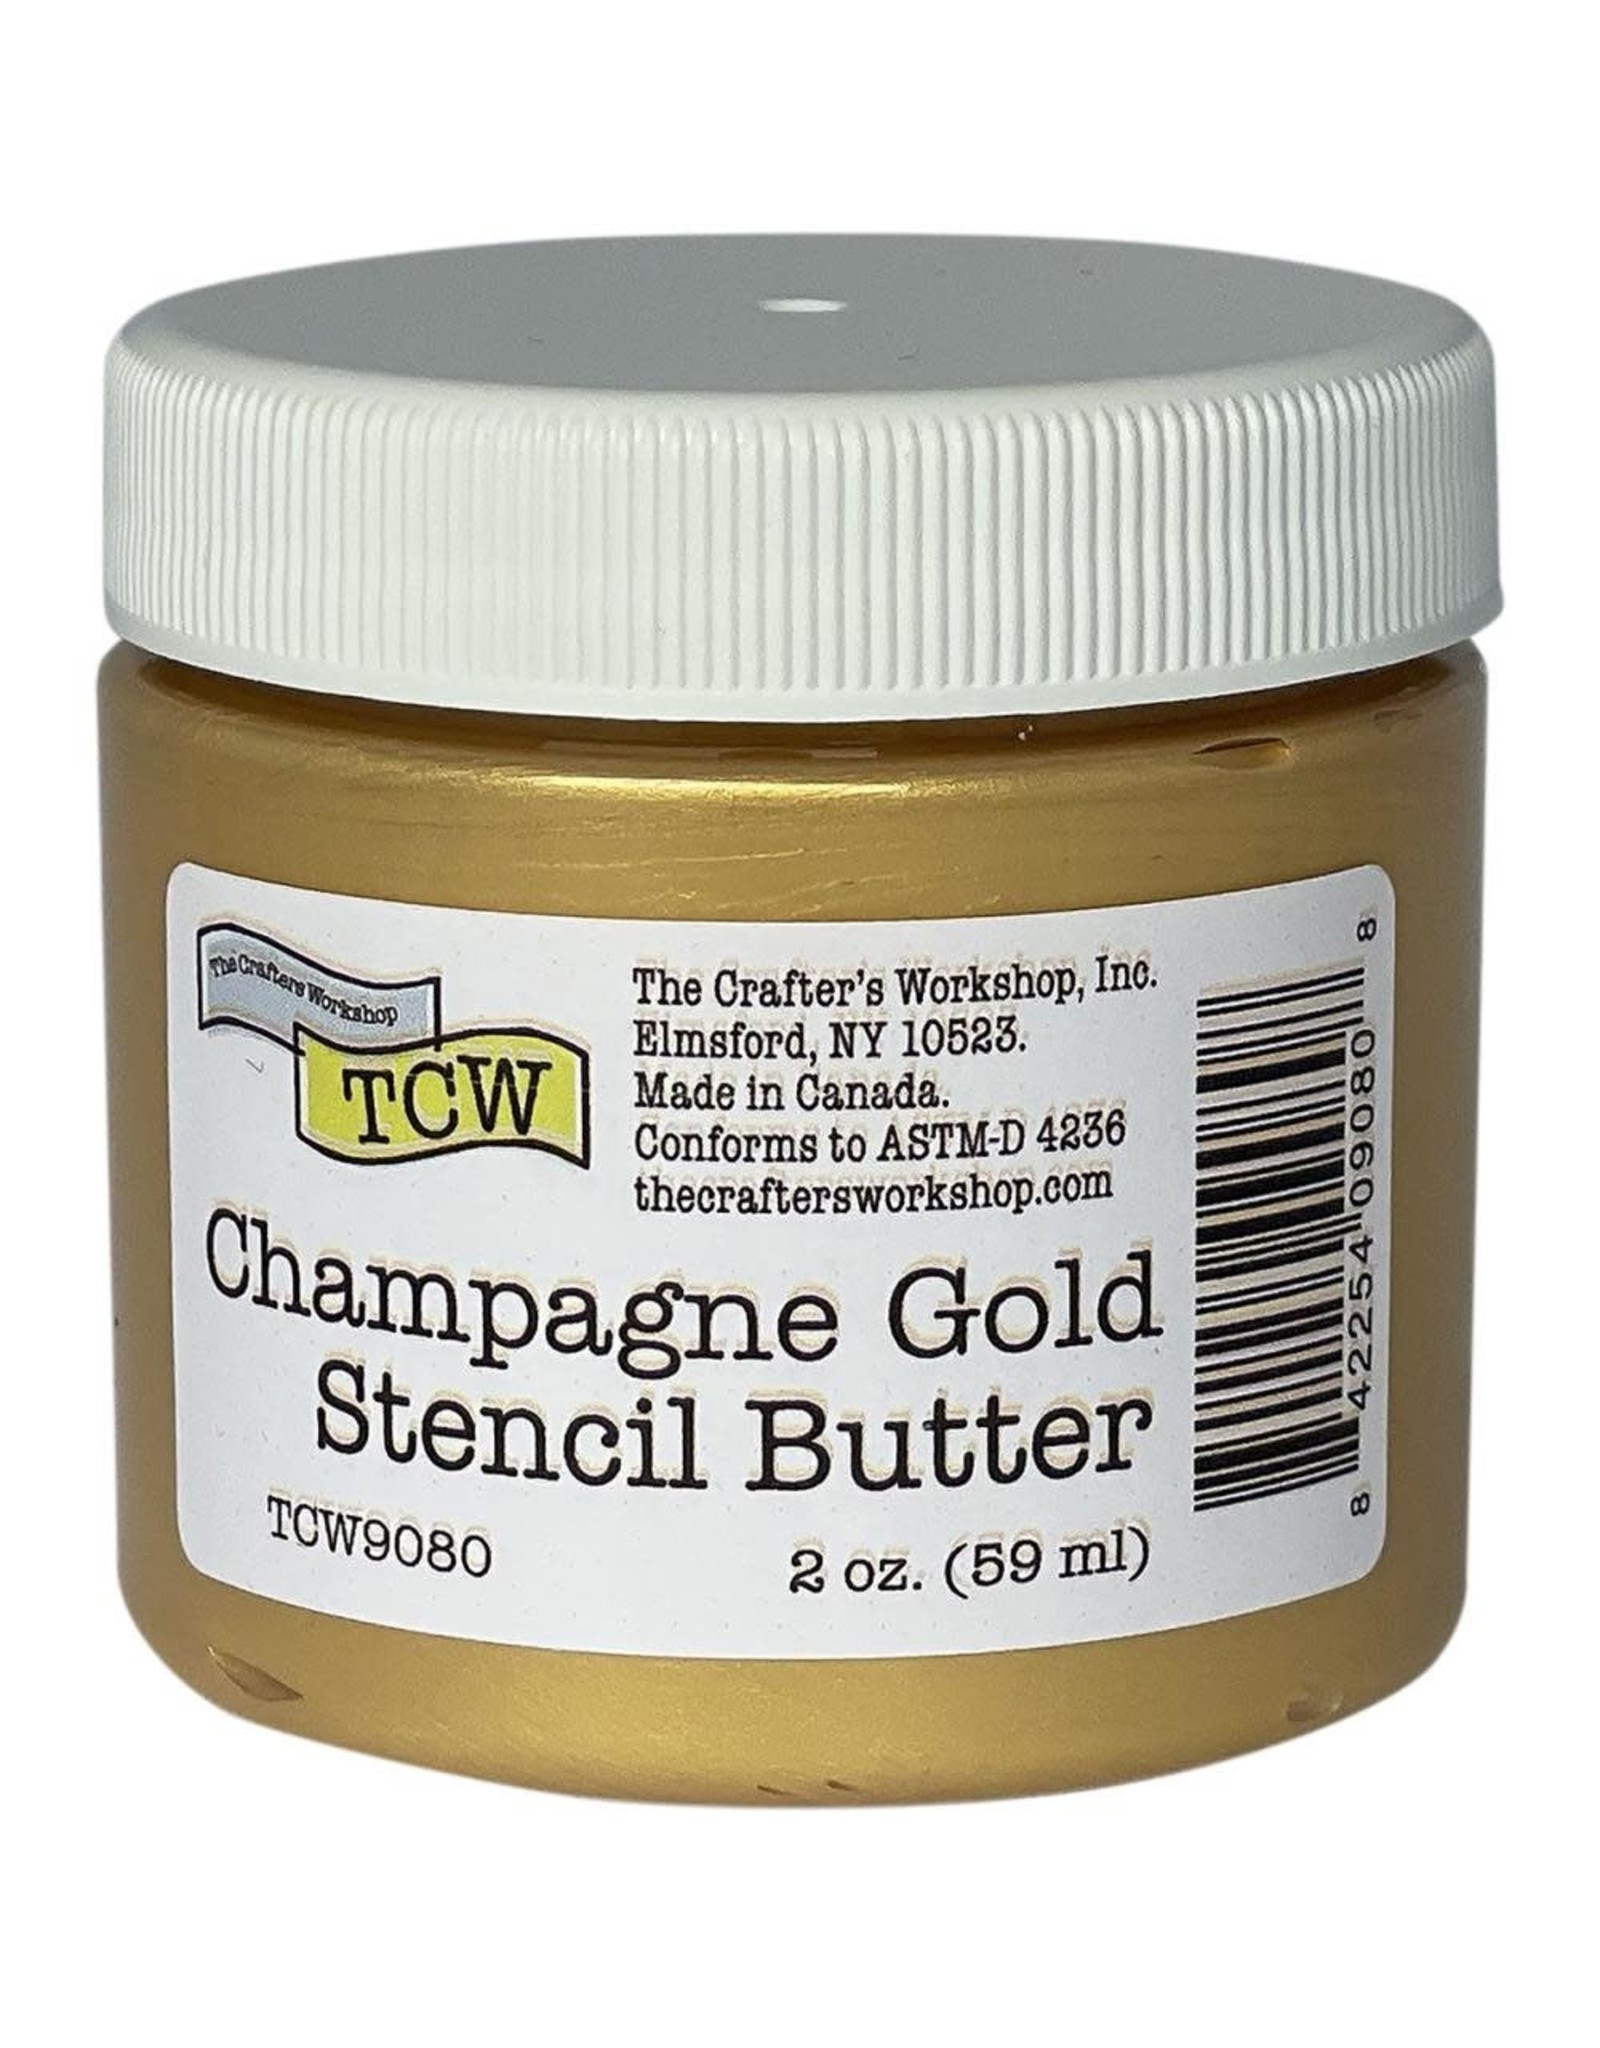 THE CRAFTERS WORKSHOP Stencil Butter 2 oz Champagne Gold